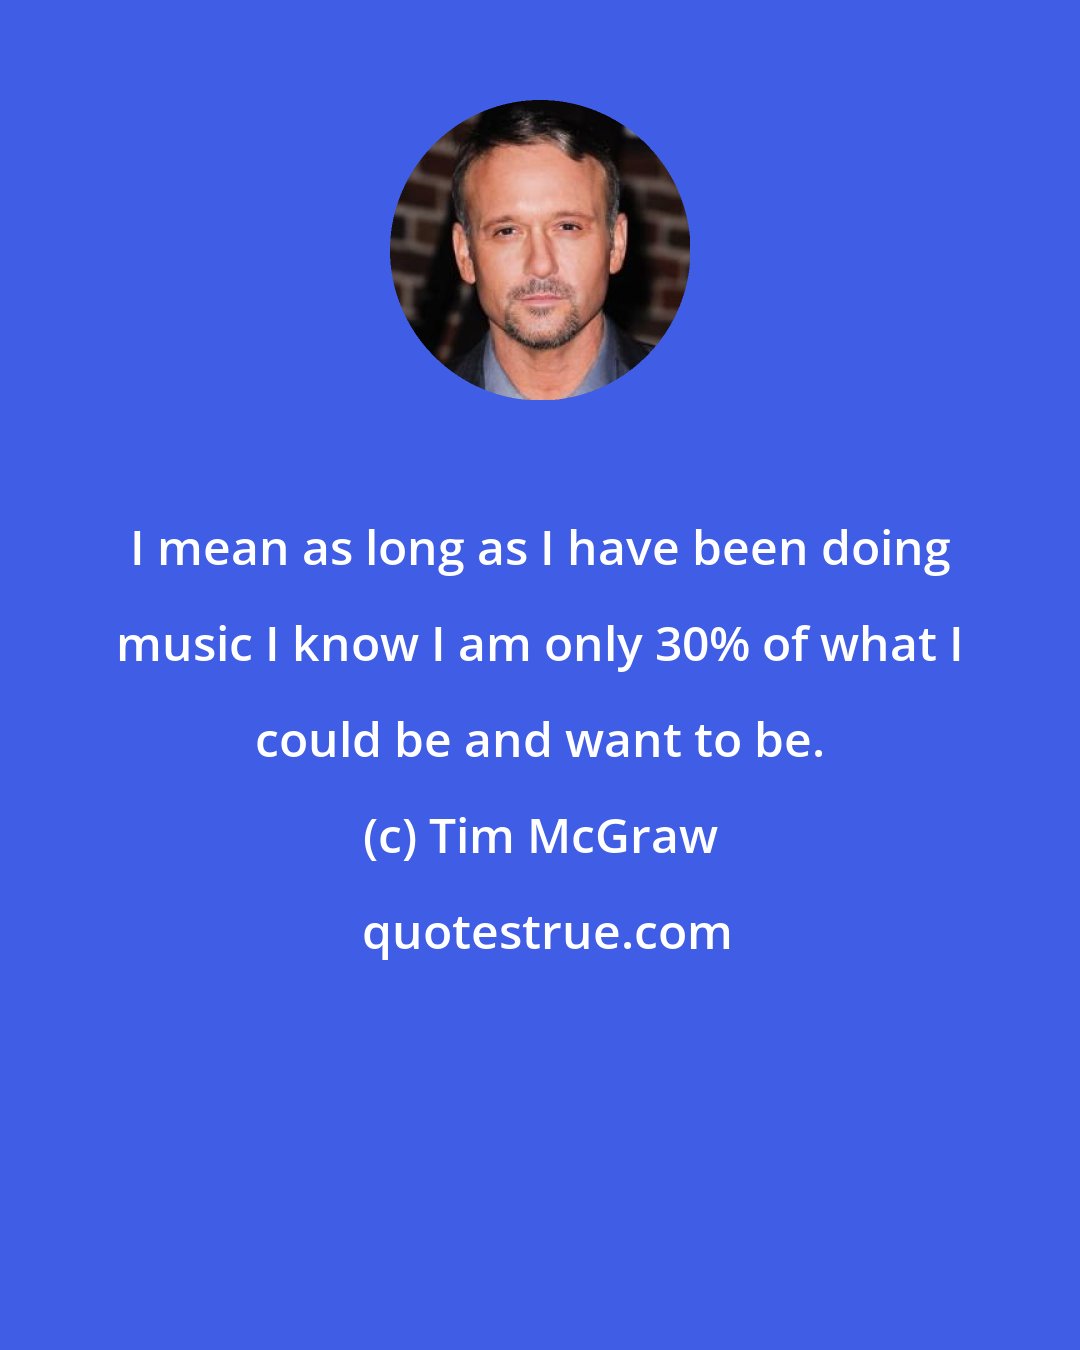 Tim McGraw: I mean as long as I have been doing music I know I am only 30% of what I could be and want to be.